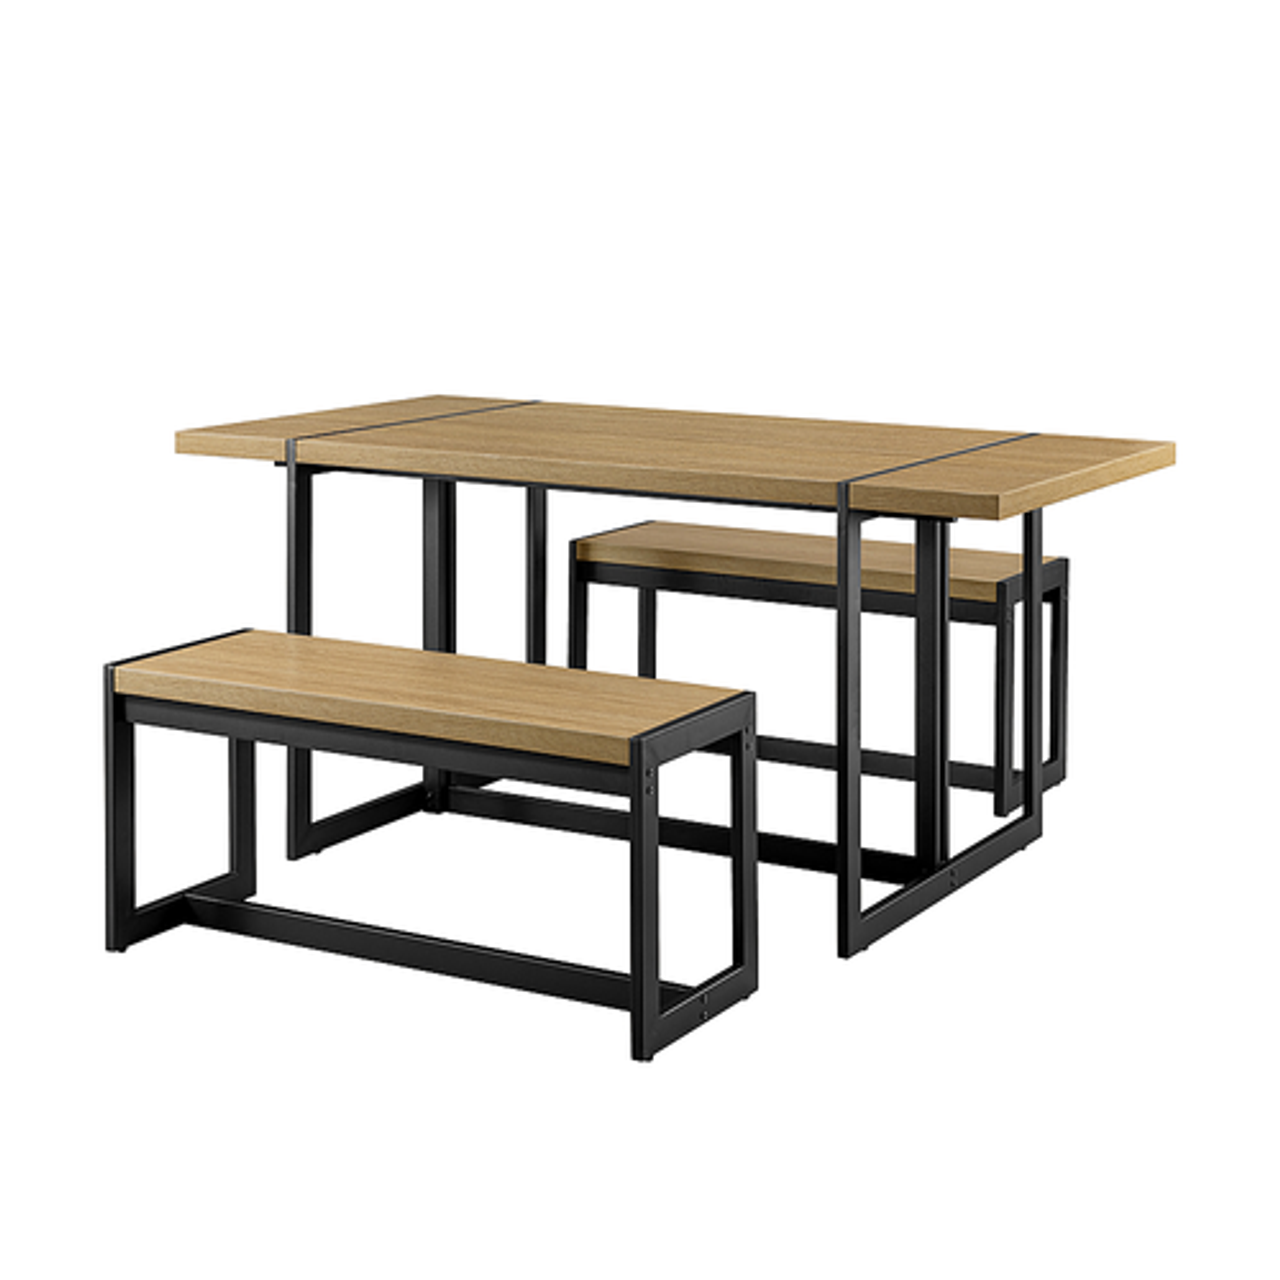 Walker Edison - Industrial Dining Set with 2 Benches - Coastal Oak